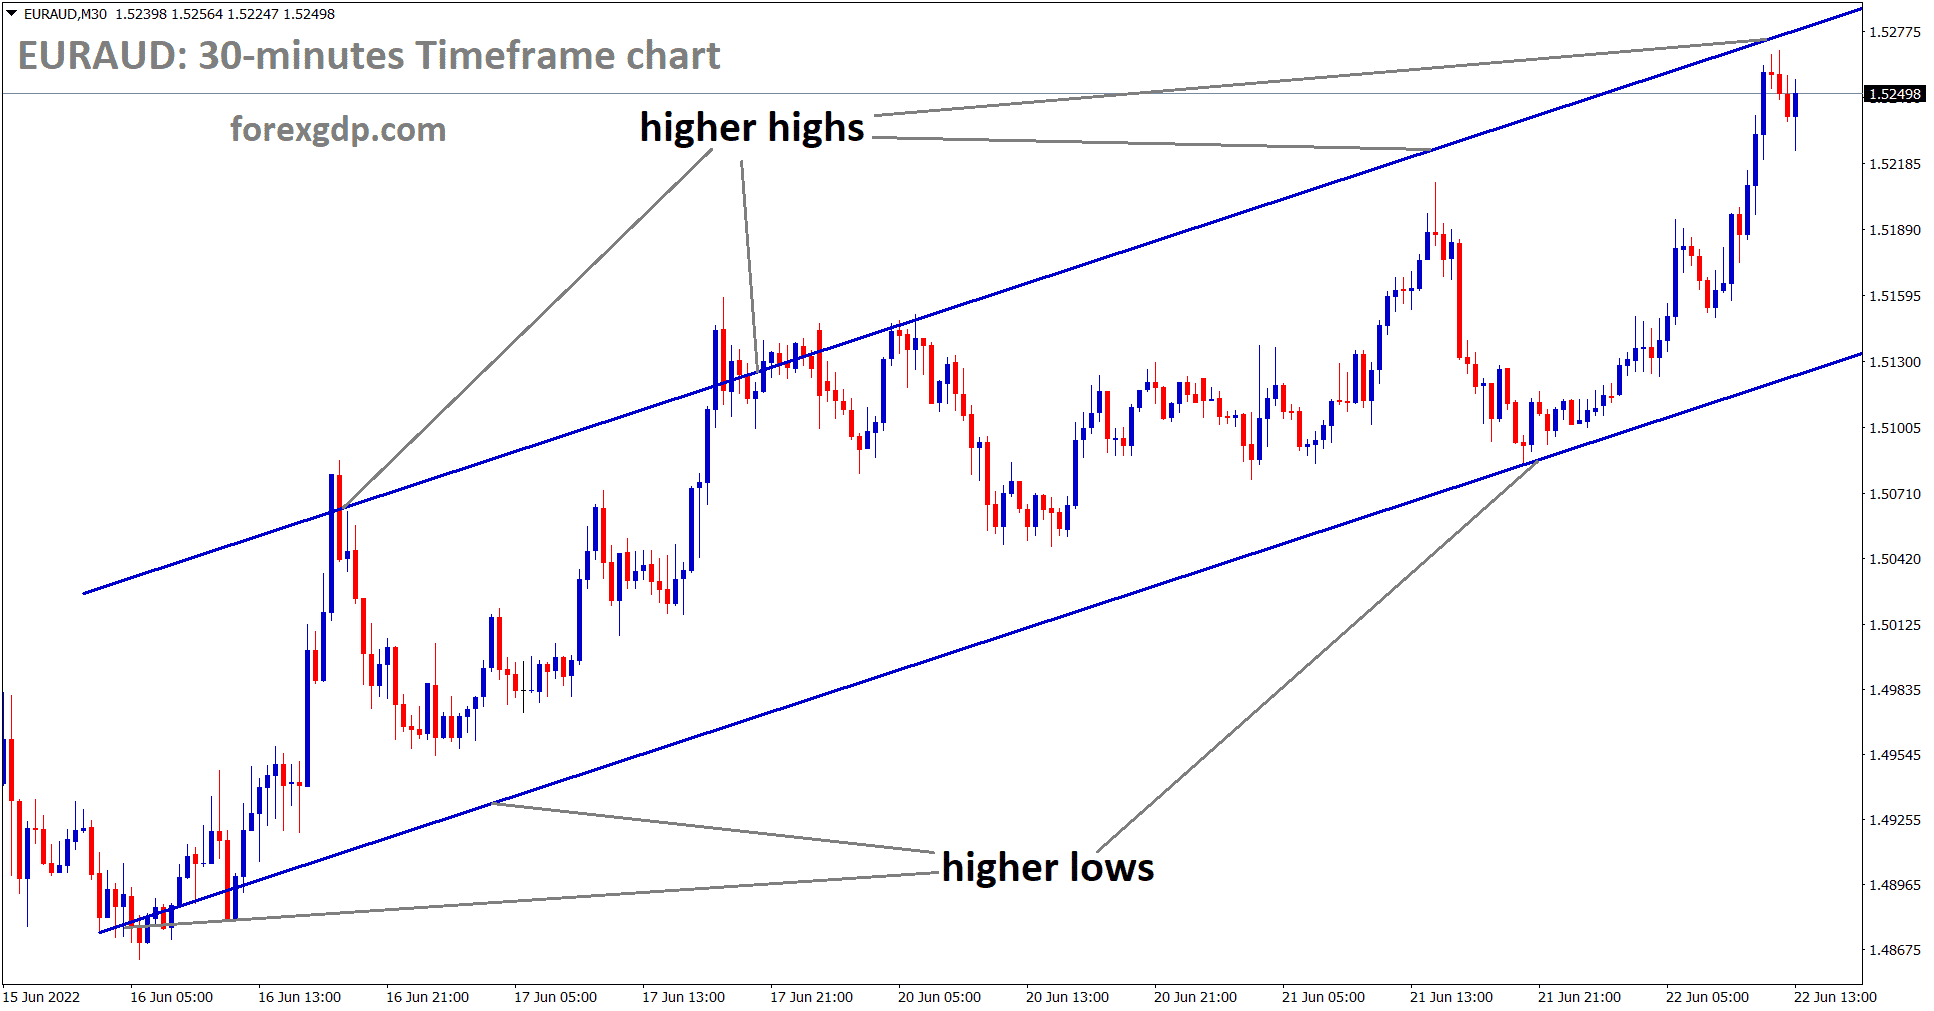 EURAUD is moving in a ascending channe and the market has reached the higher high area of the channel.